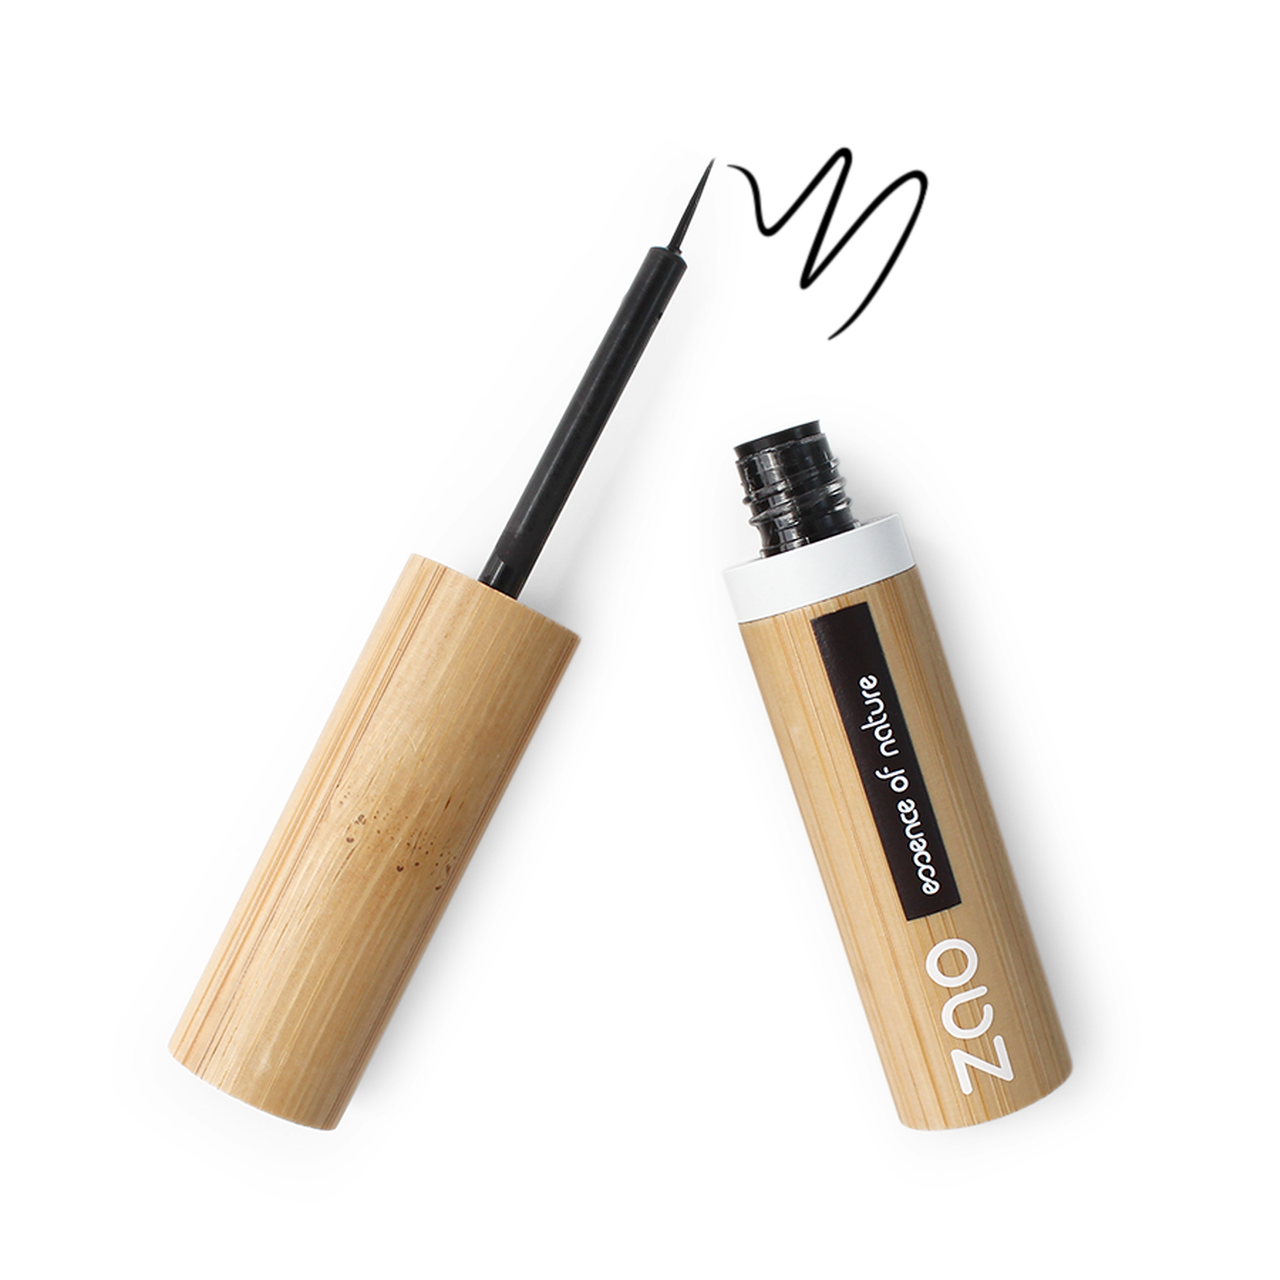 Zao Refillable Liquid Brush Eyeliner | Ensures an intense and long-lasting make-up look, even for sensitive eyes | Cruelty Free | Vegan | Low Waste